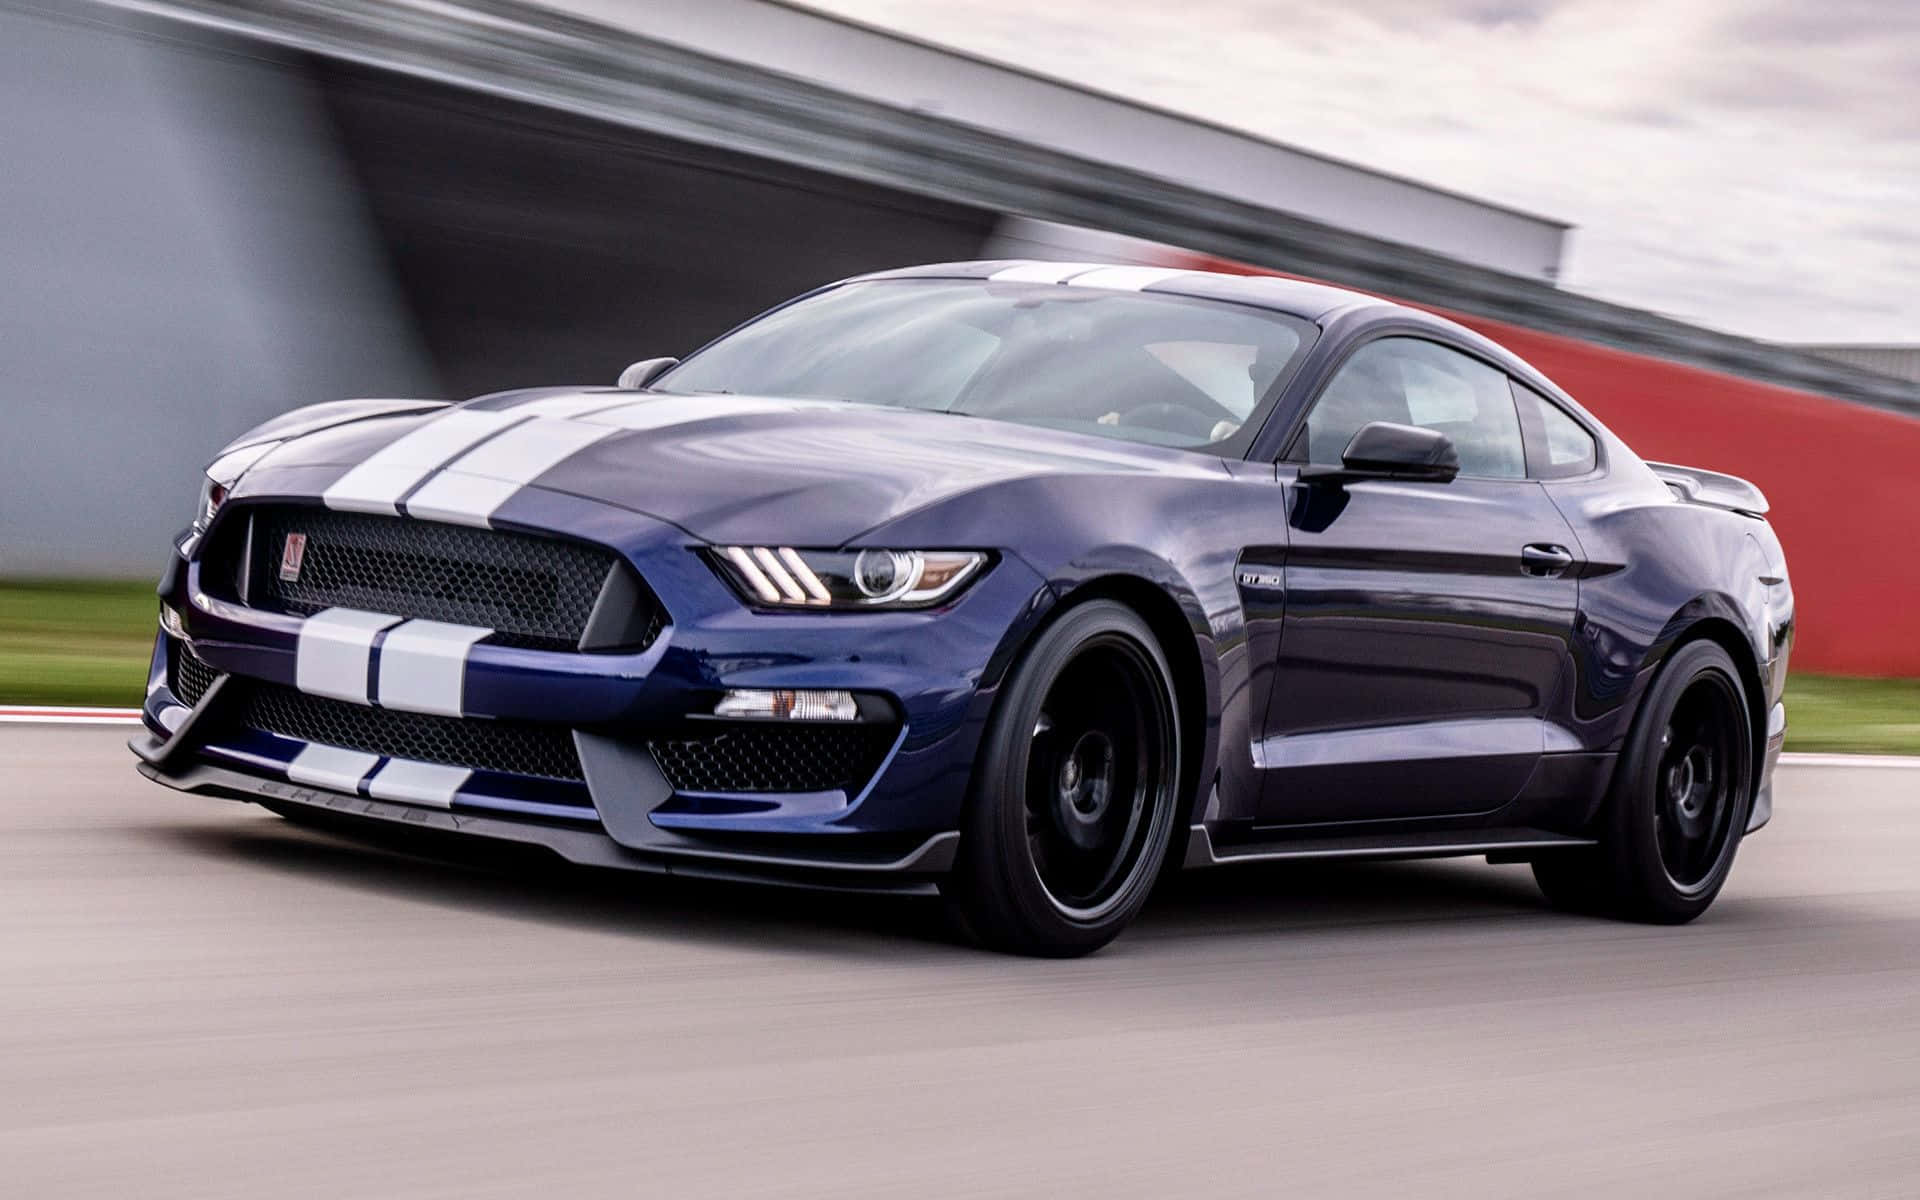 Powerful Ford Mustang Shelby GT350 in its full glory Wallpaper